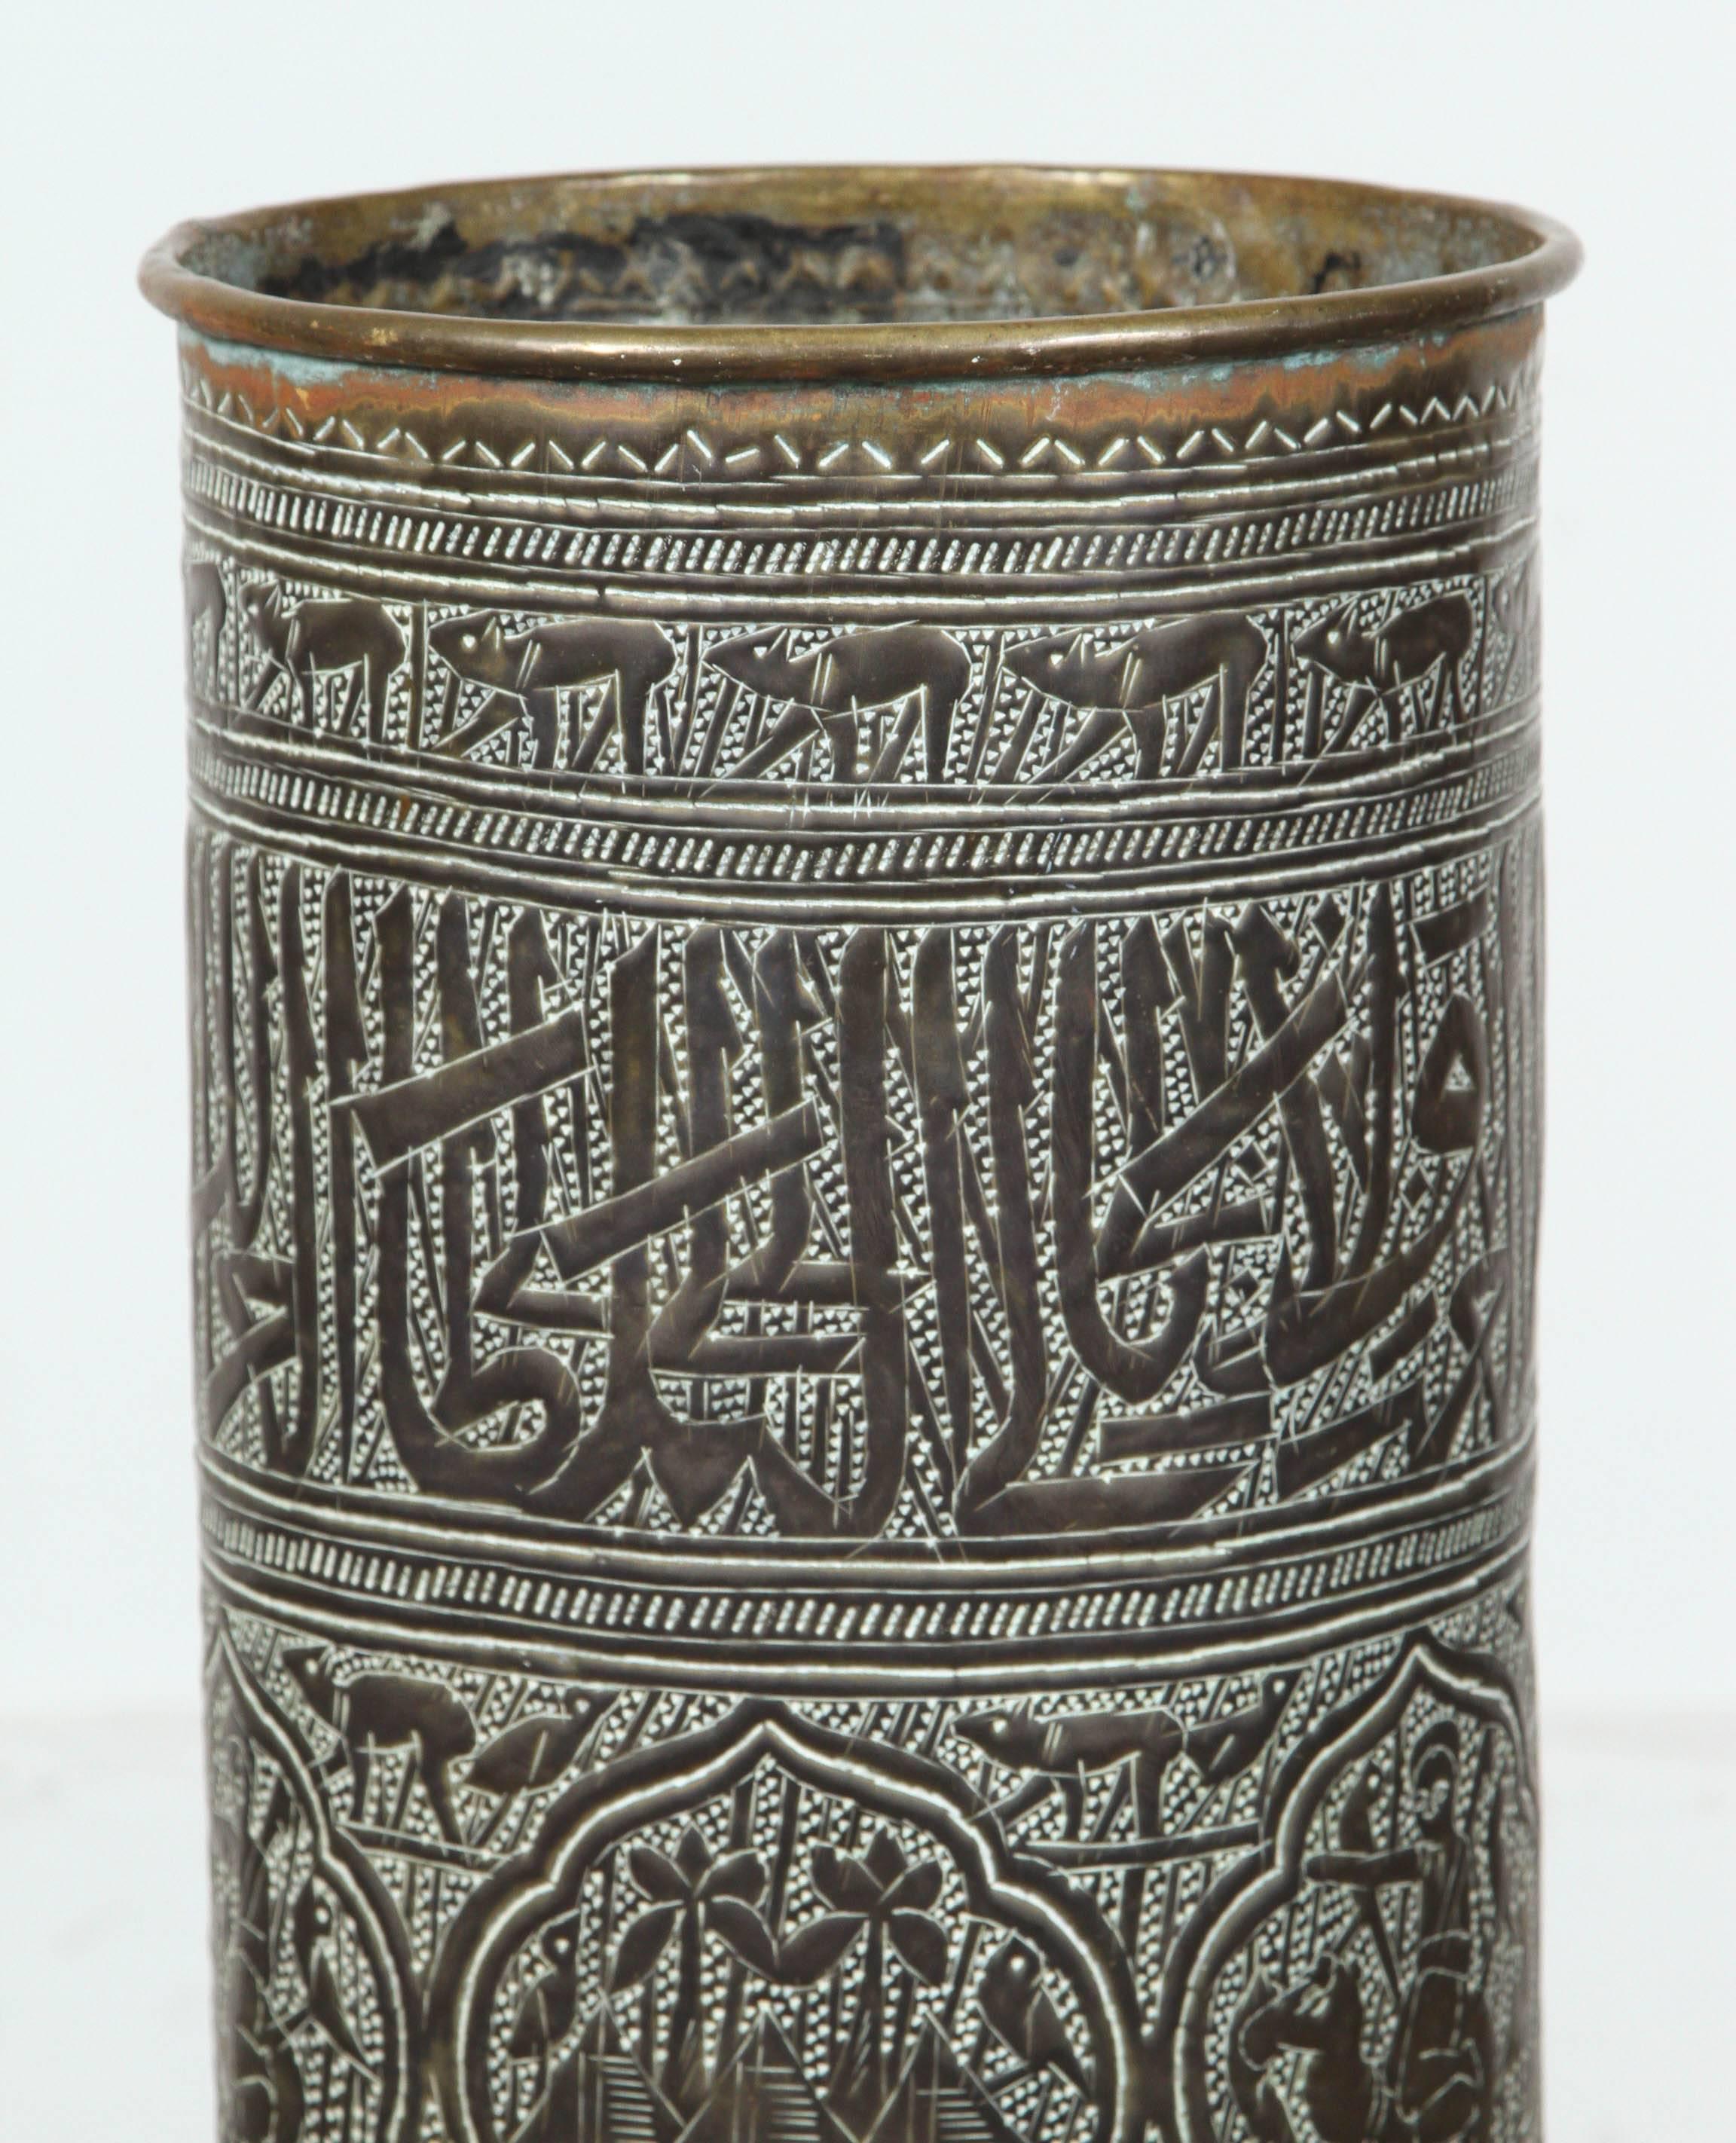 Rare and unique late 19th century Indo-Persian umbrella, cane stand with nice patina, featuring hand-hammered Arabic calligraphy writing and animals designs and desert scenes.
Nice antique patina.
Base is 11